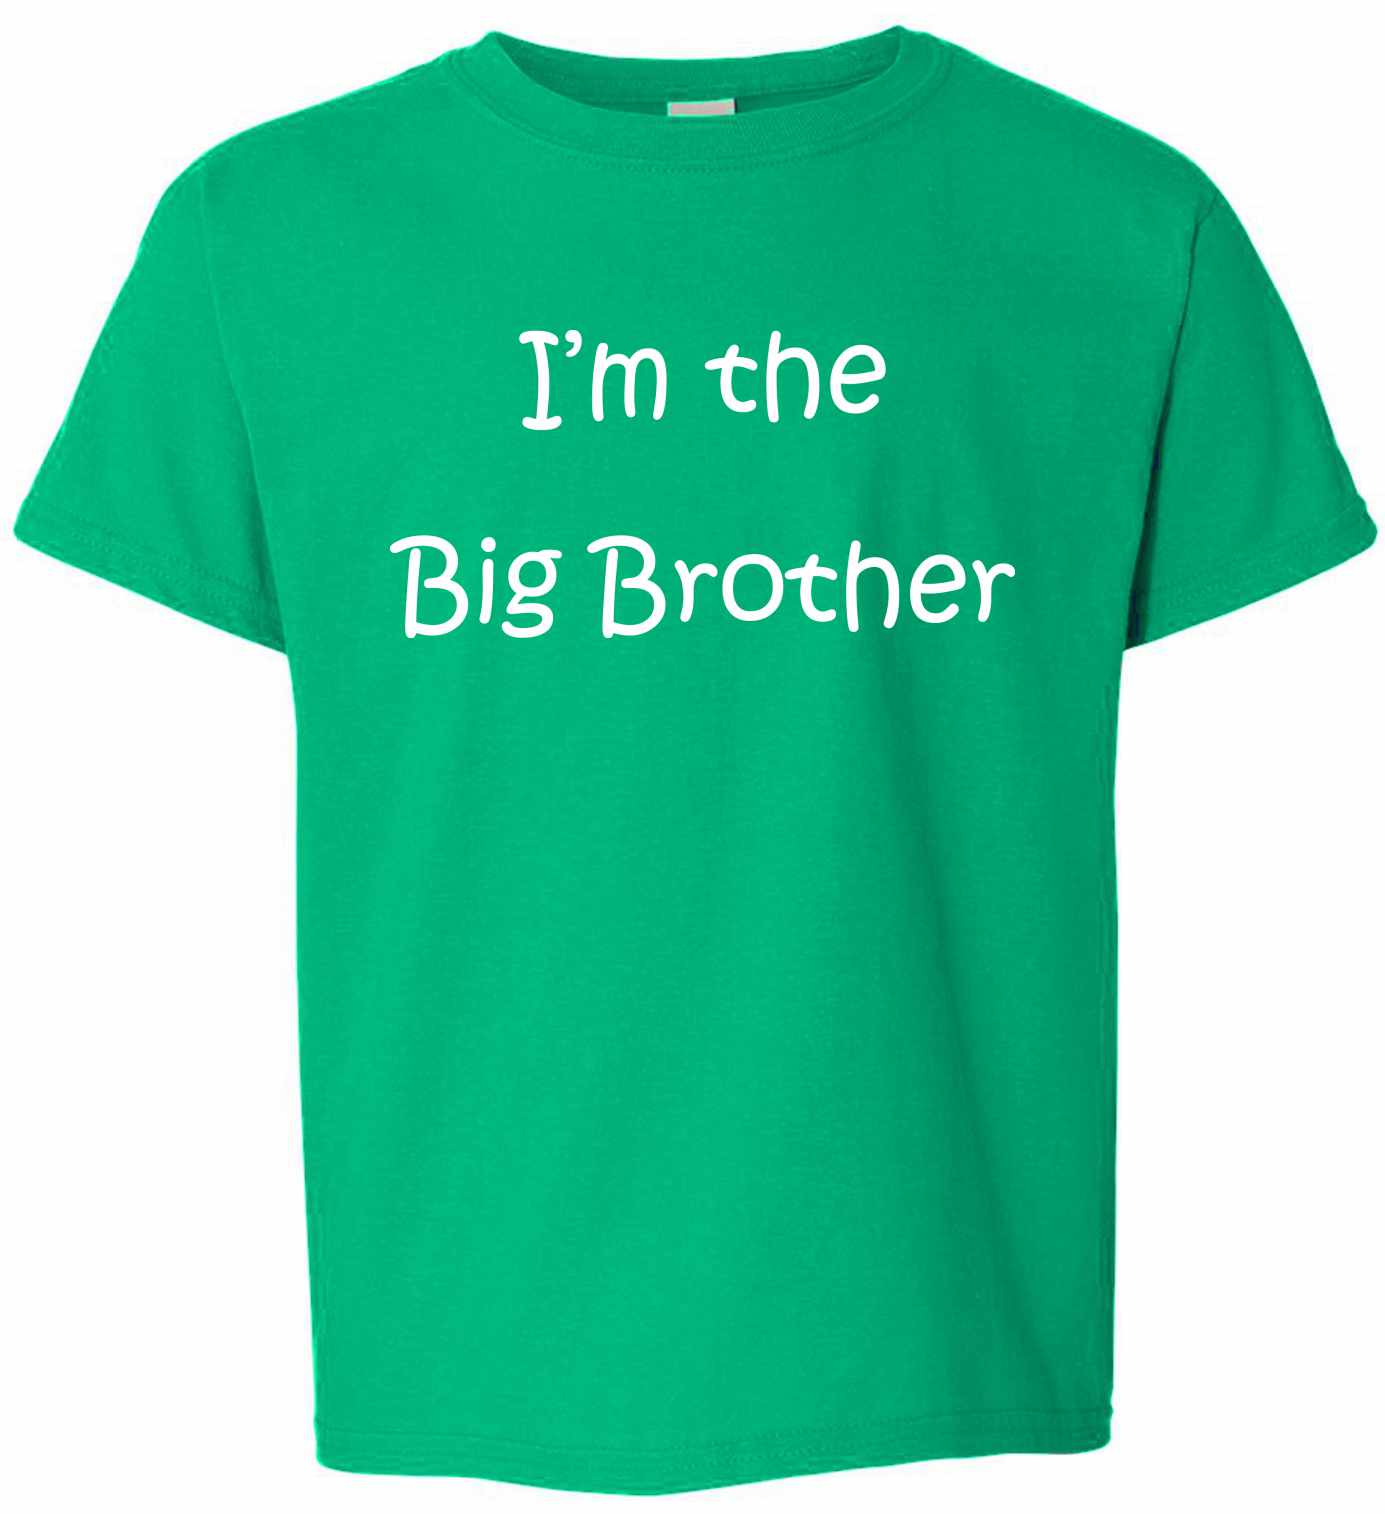 I'M THE BIG BROTHER on Youth T-Shirt (#519-201)